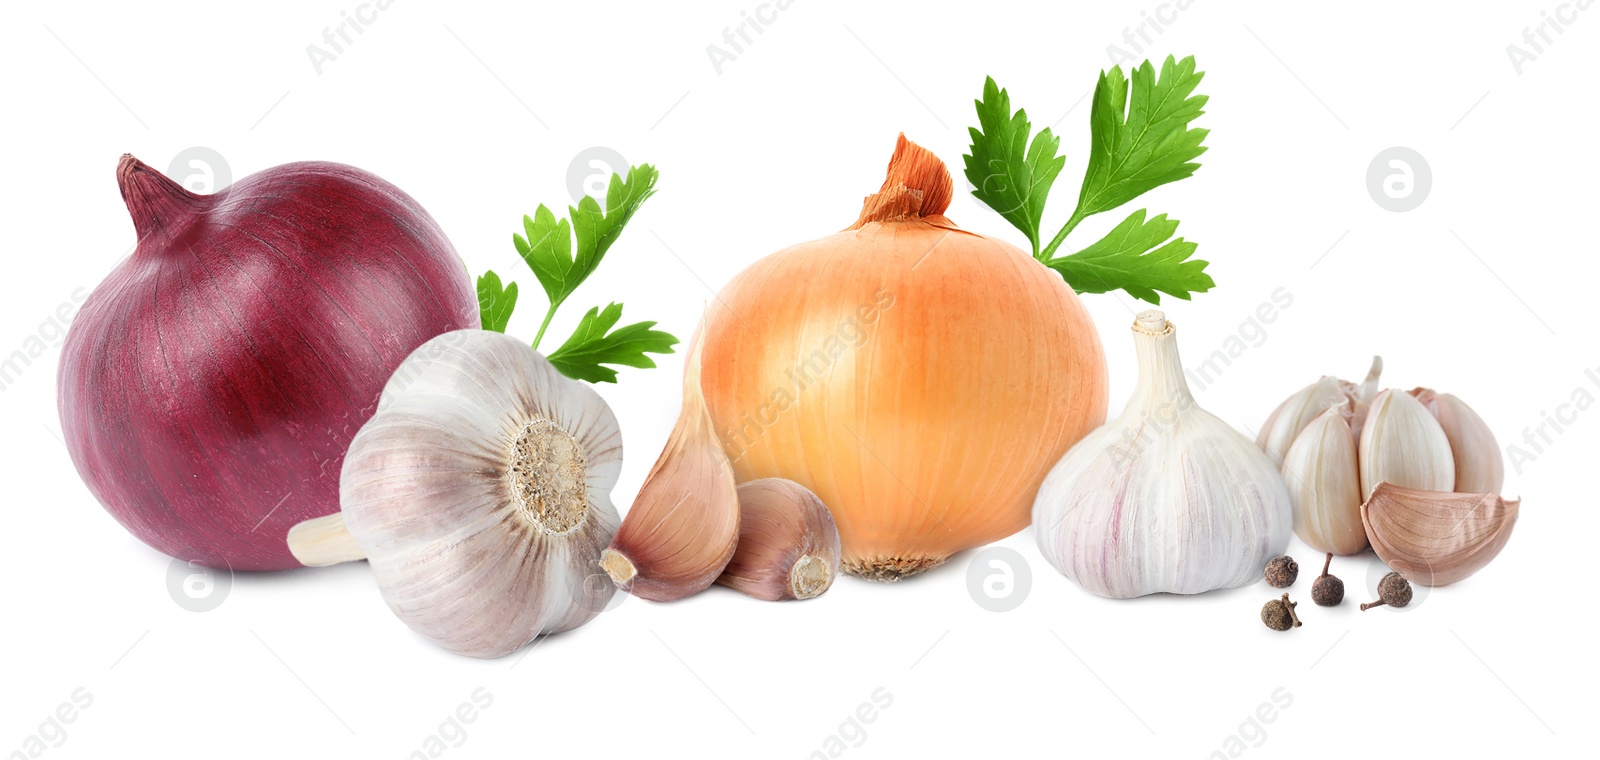 Image of Mix of fresh garlic and onions on white background. Banner design